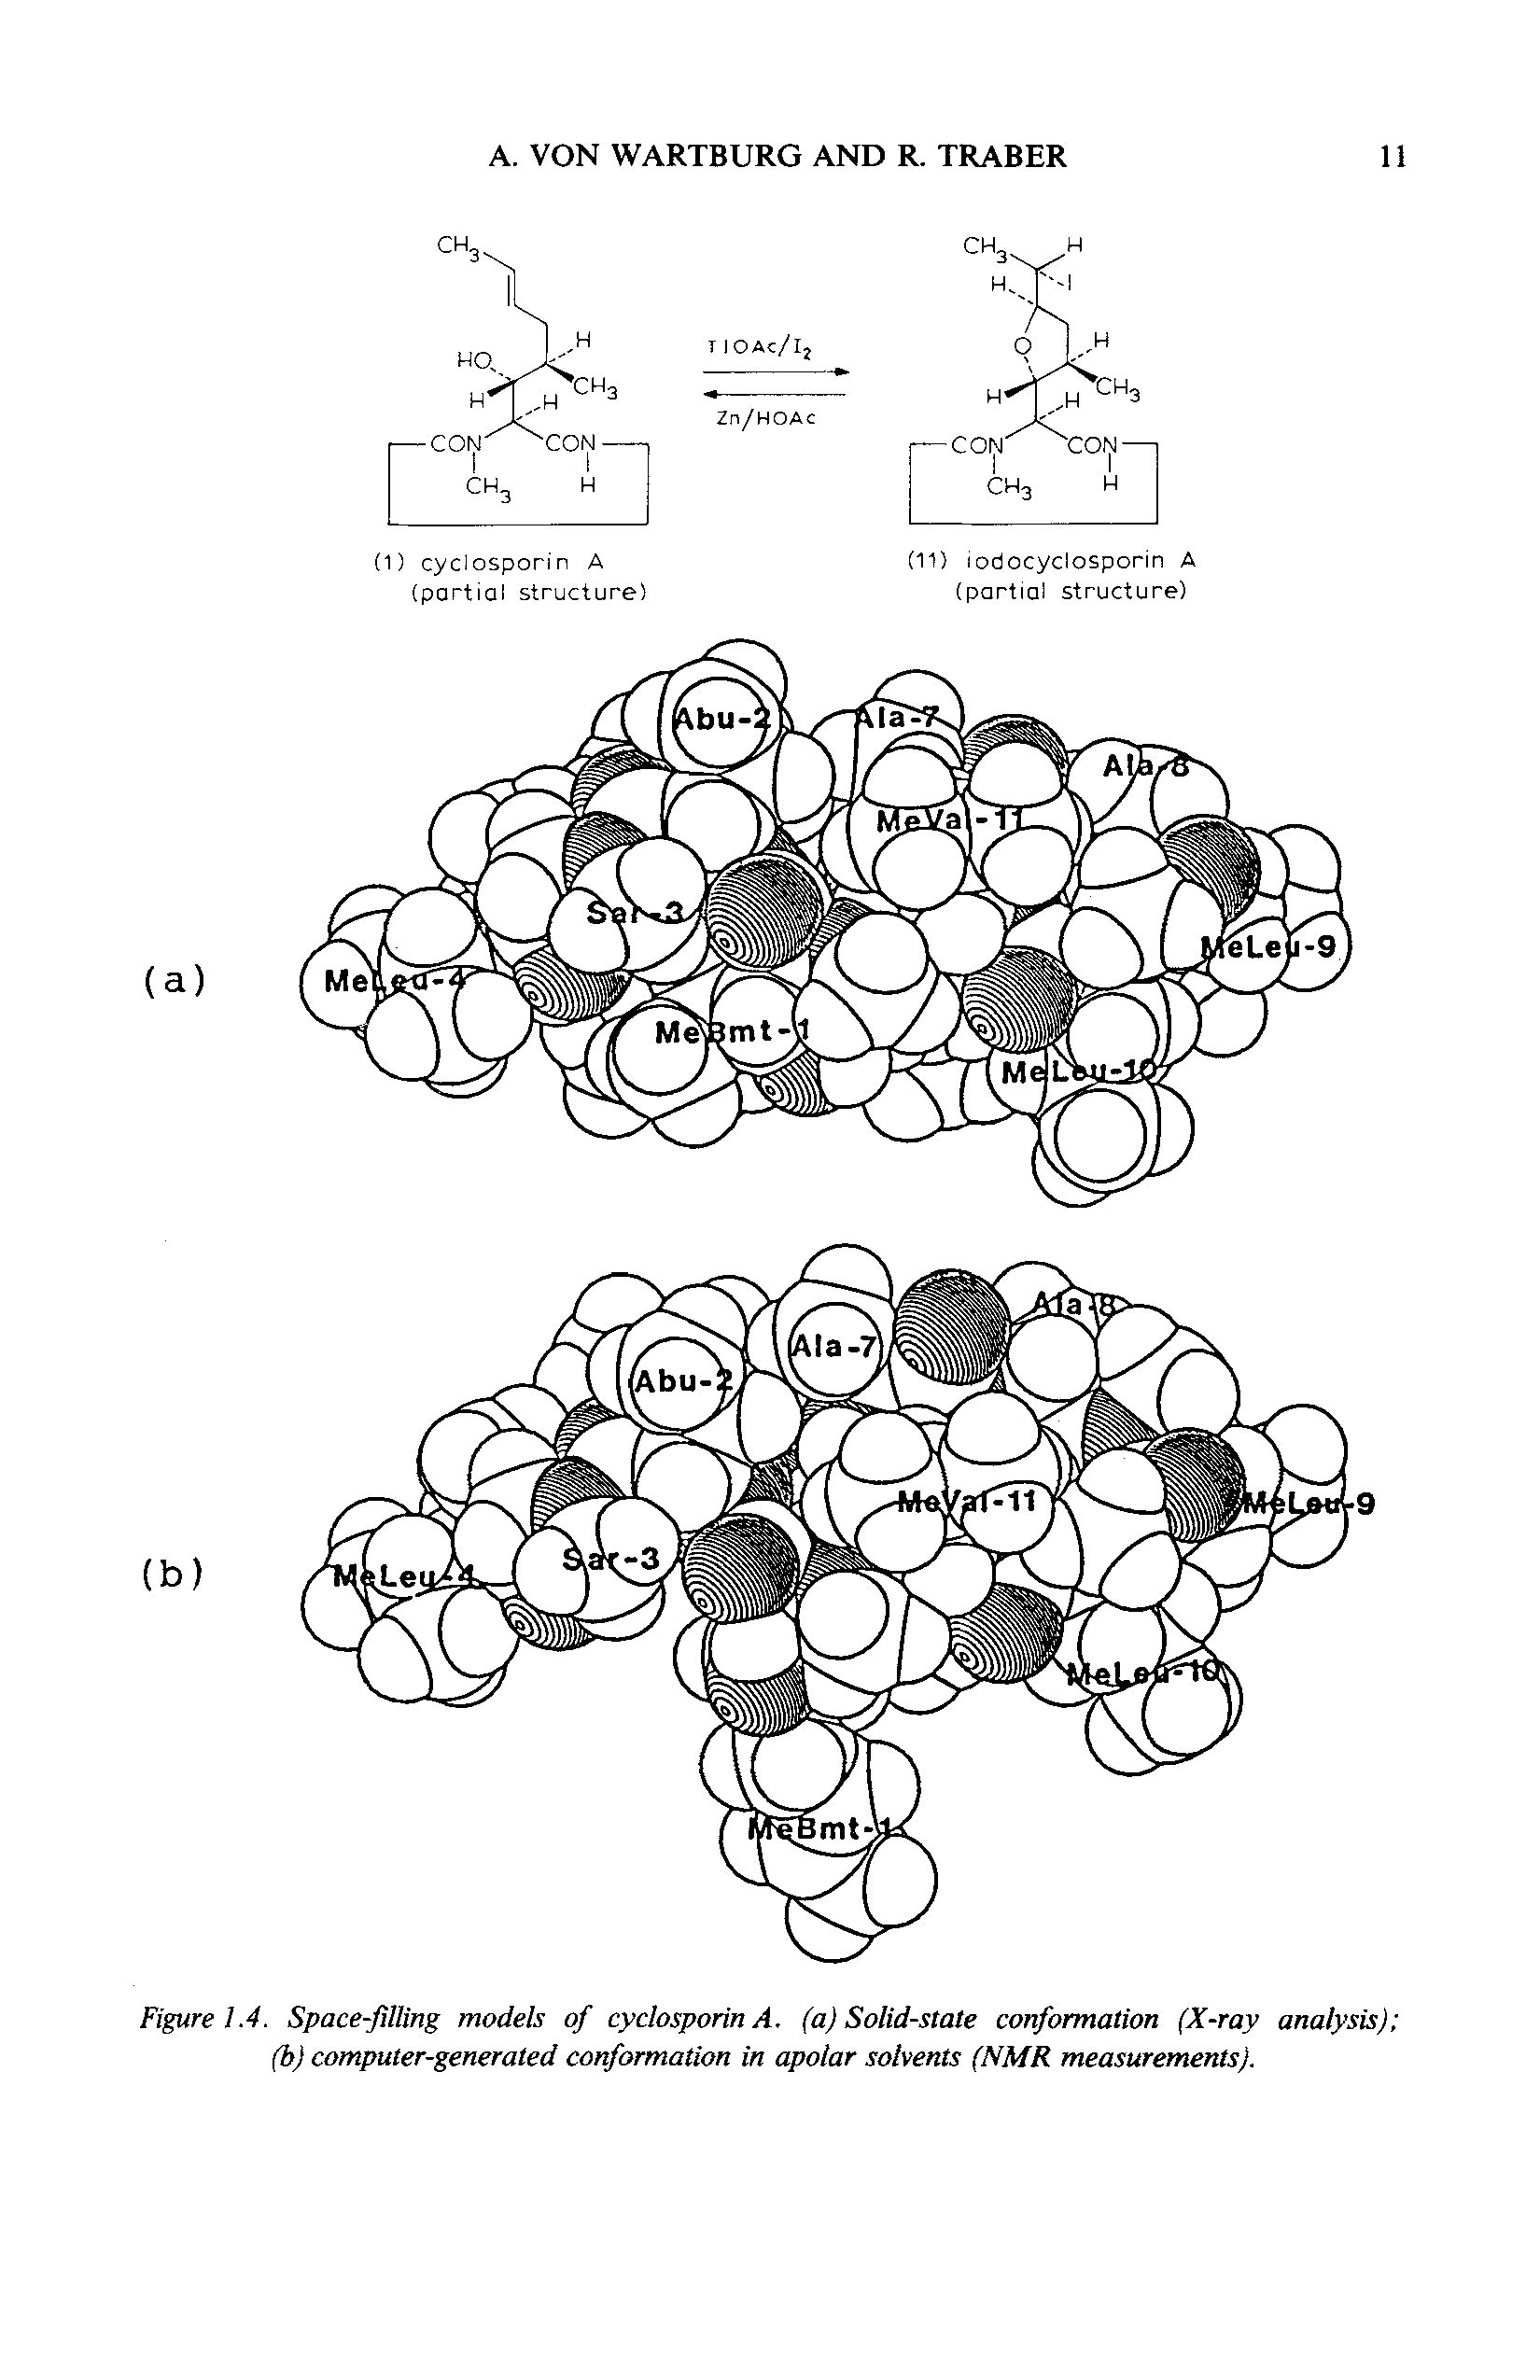 Figure 1.4. Space-filling models of cyclosporin A. (a) Solid-state conformation (X-ray analysis) (b) computer-generated conformation in apolar solvents (NMR measurements).